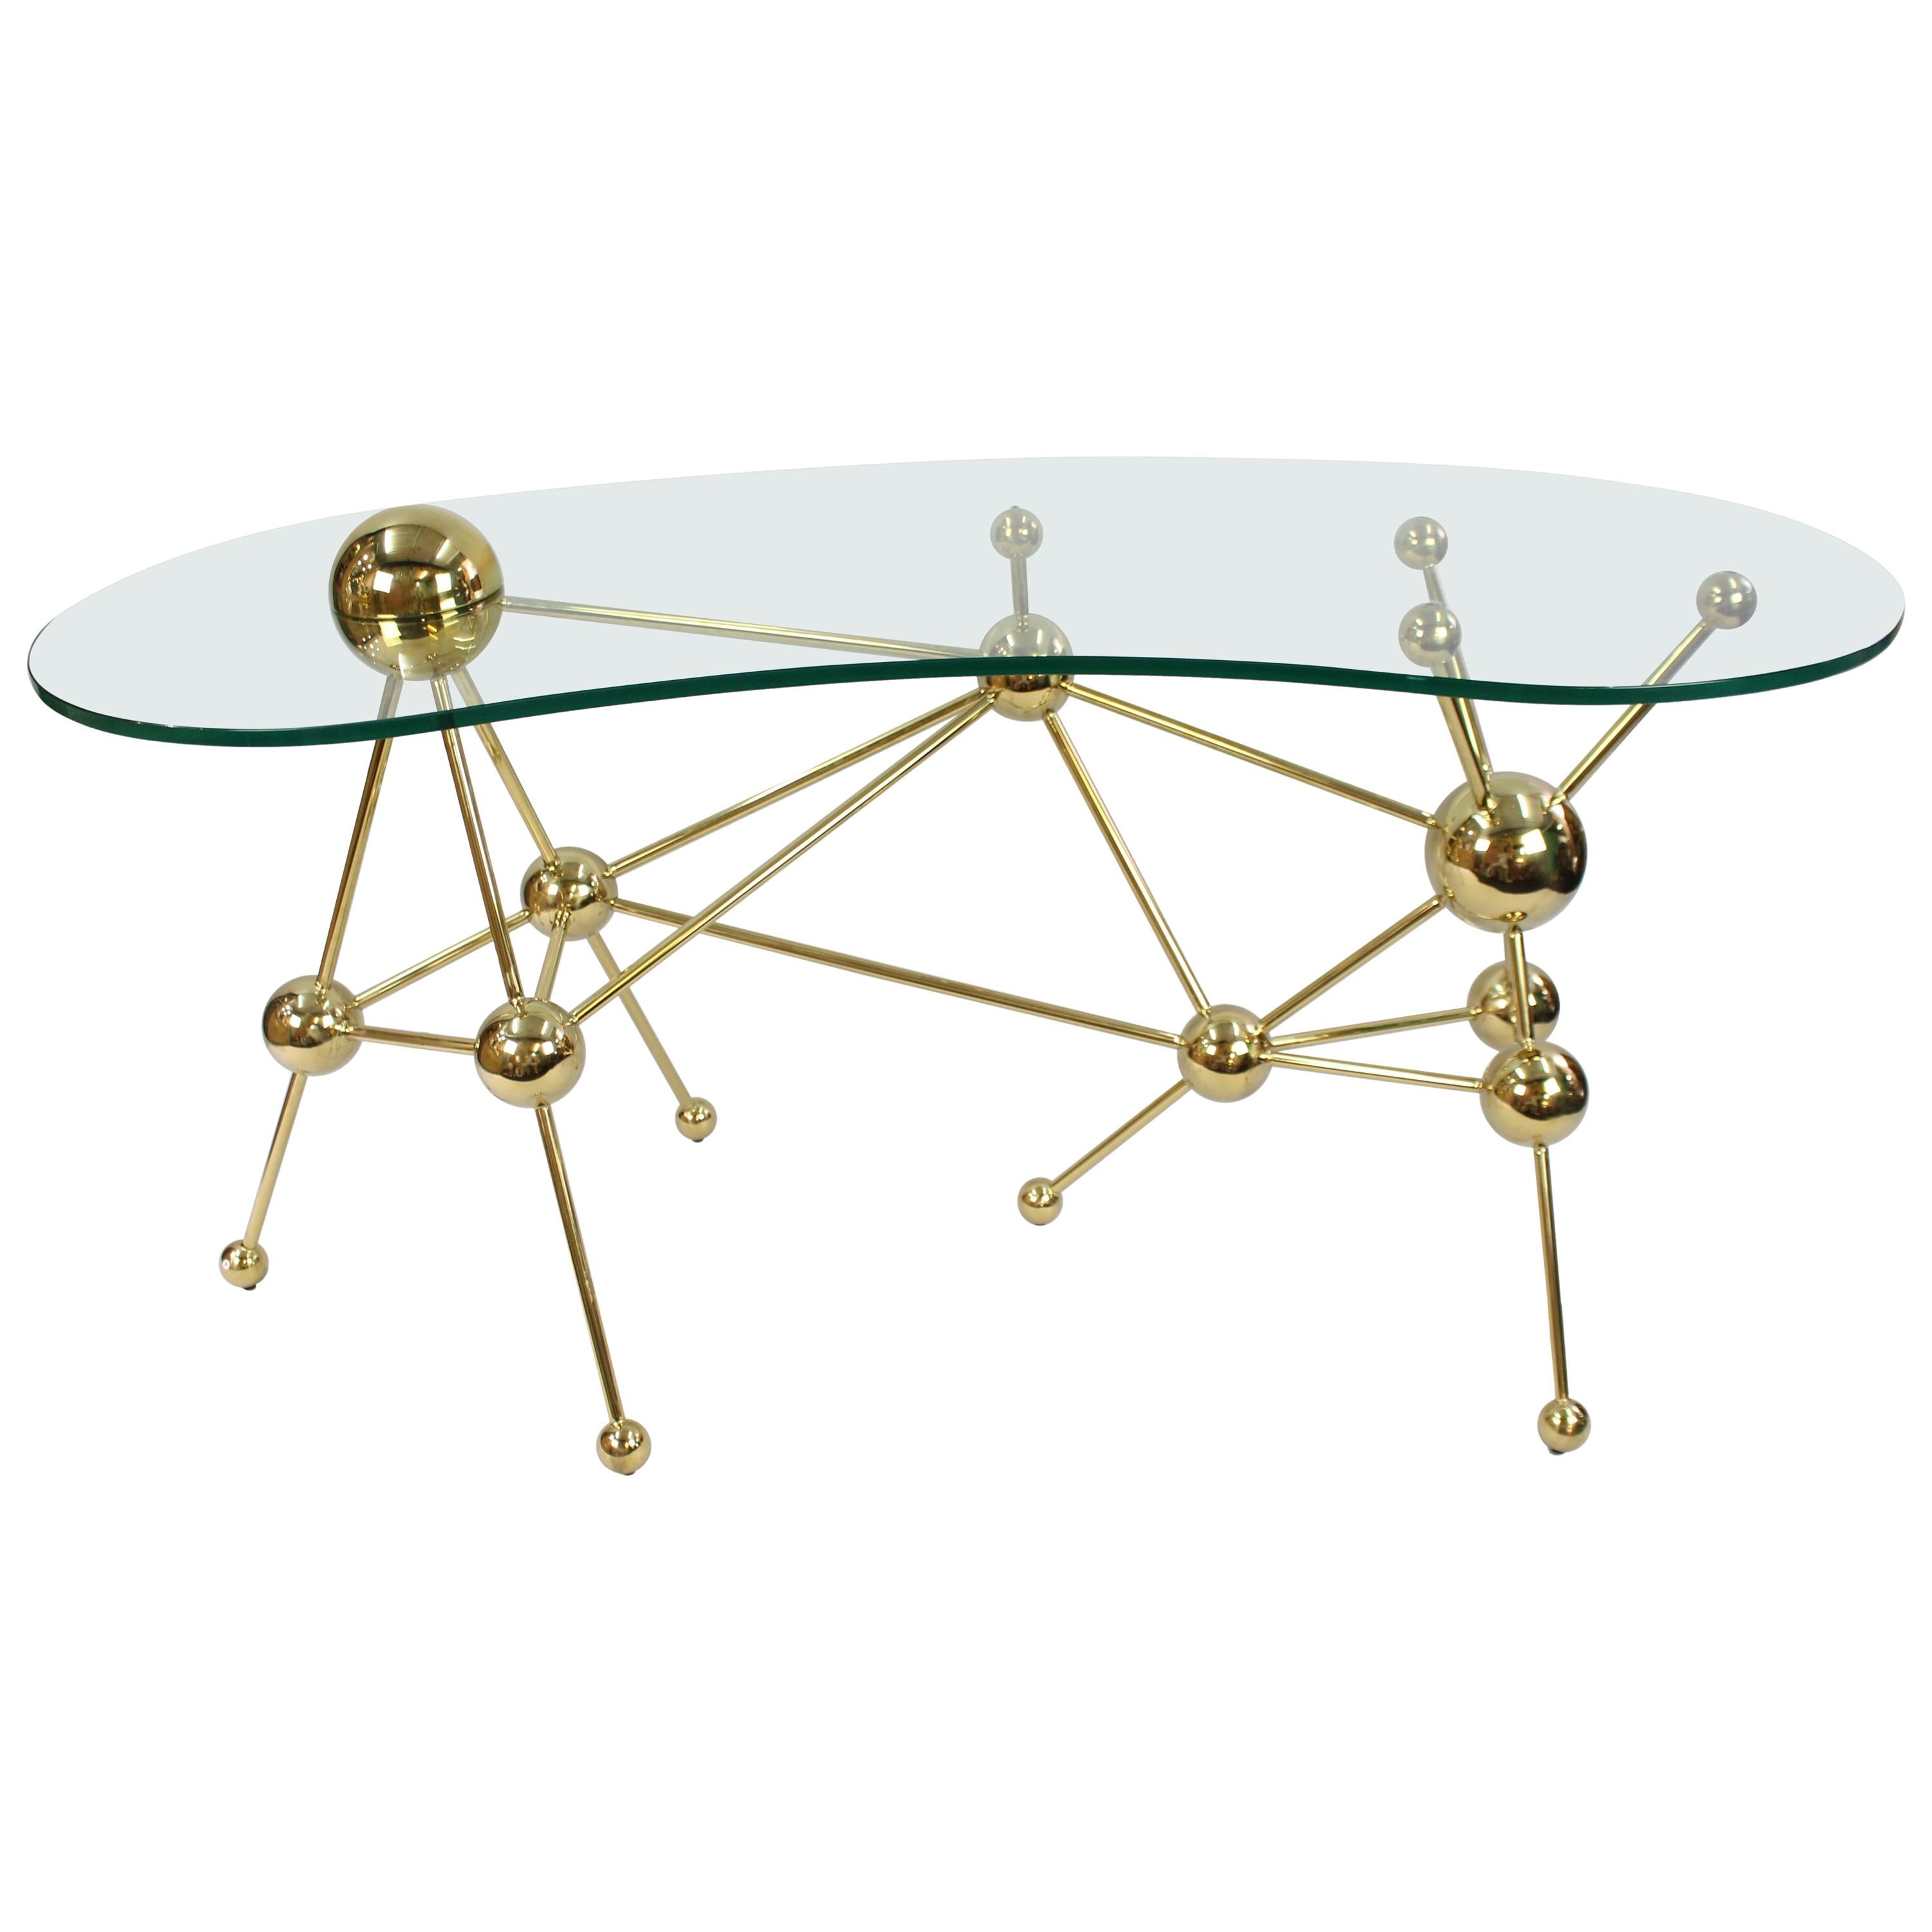 Eichholtz Kidney Shaped Glass Topped Atomic Design Table For Sale